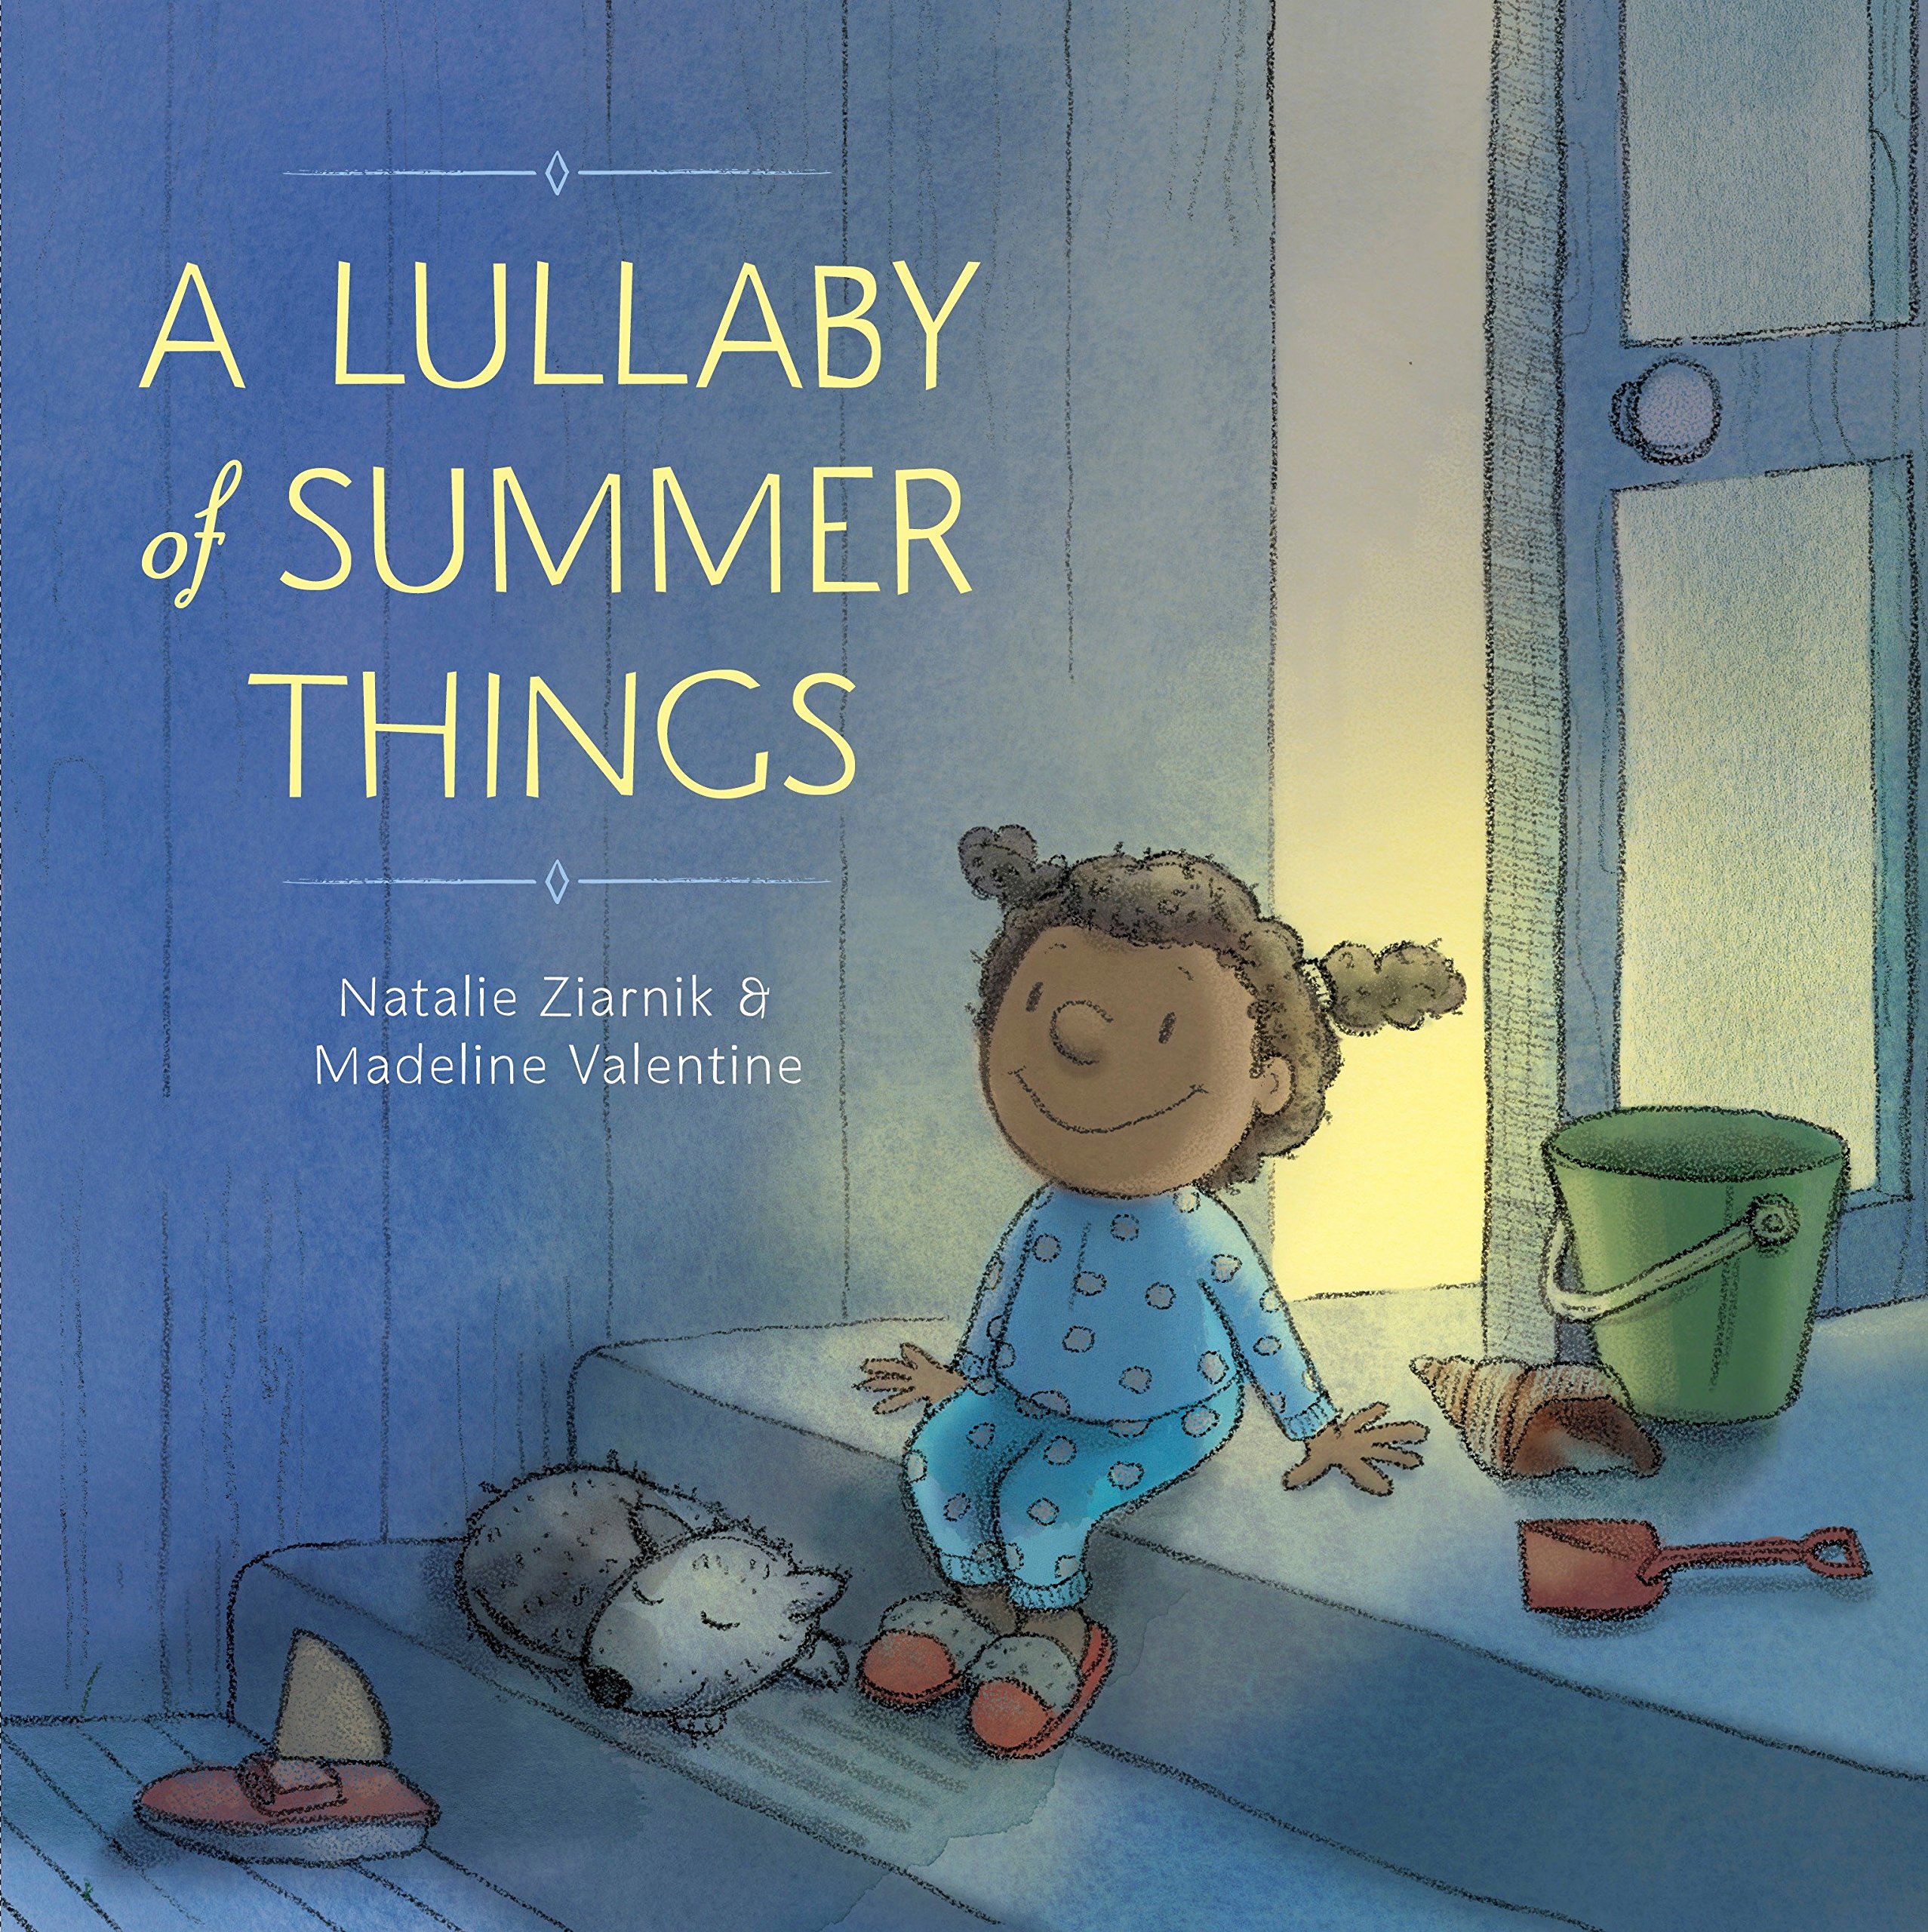 image of lullaby of summer things